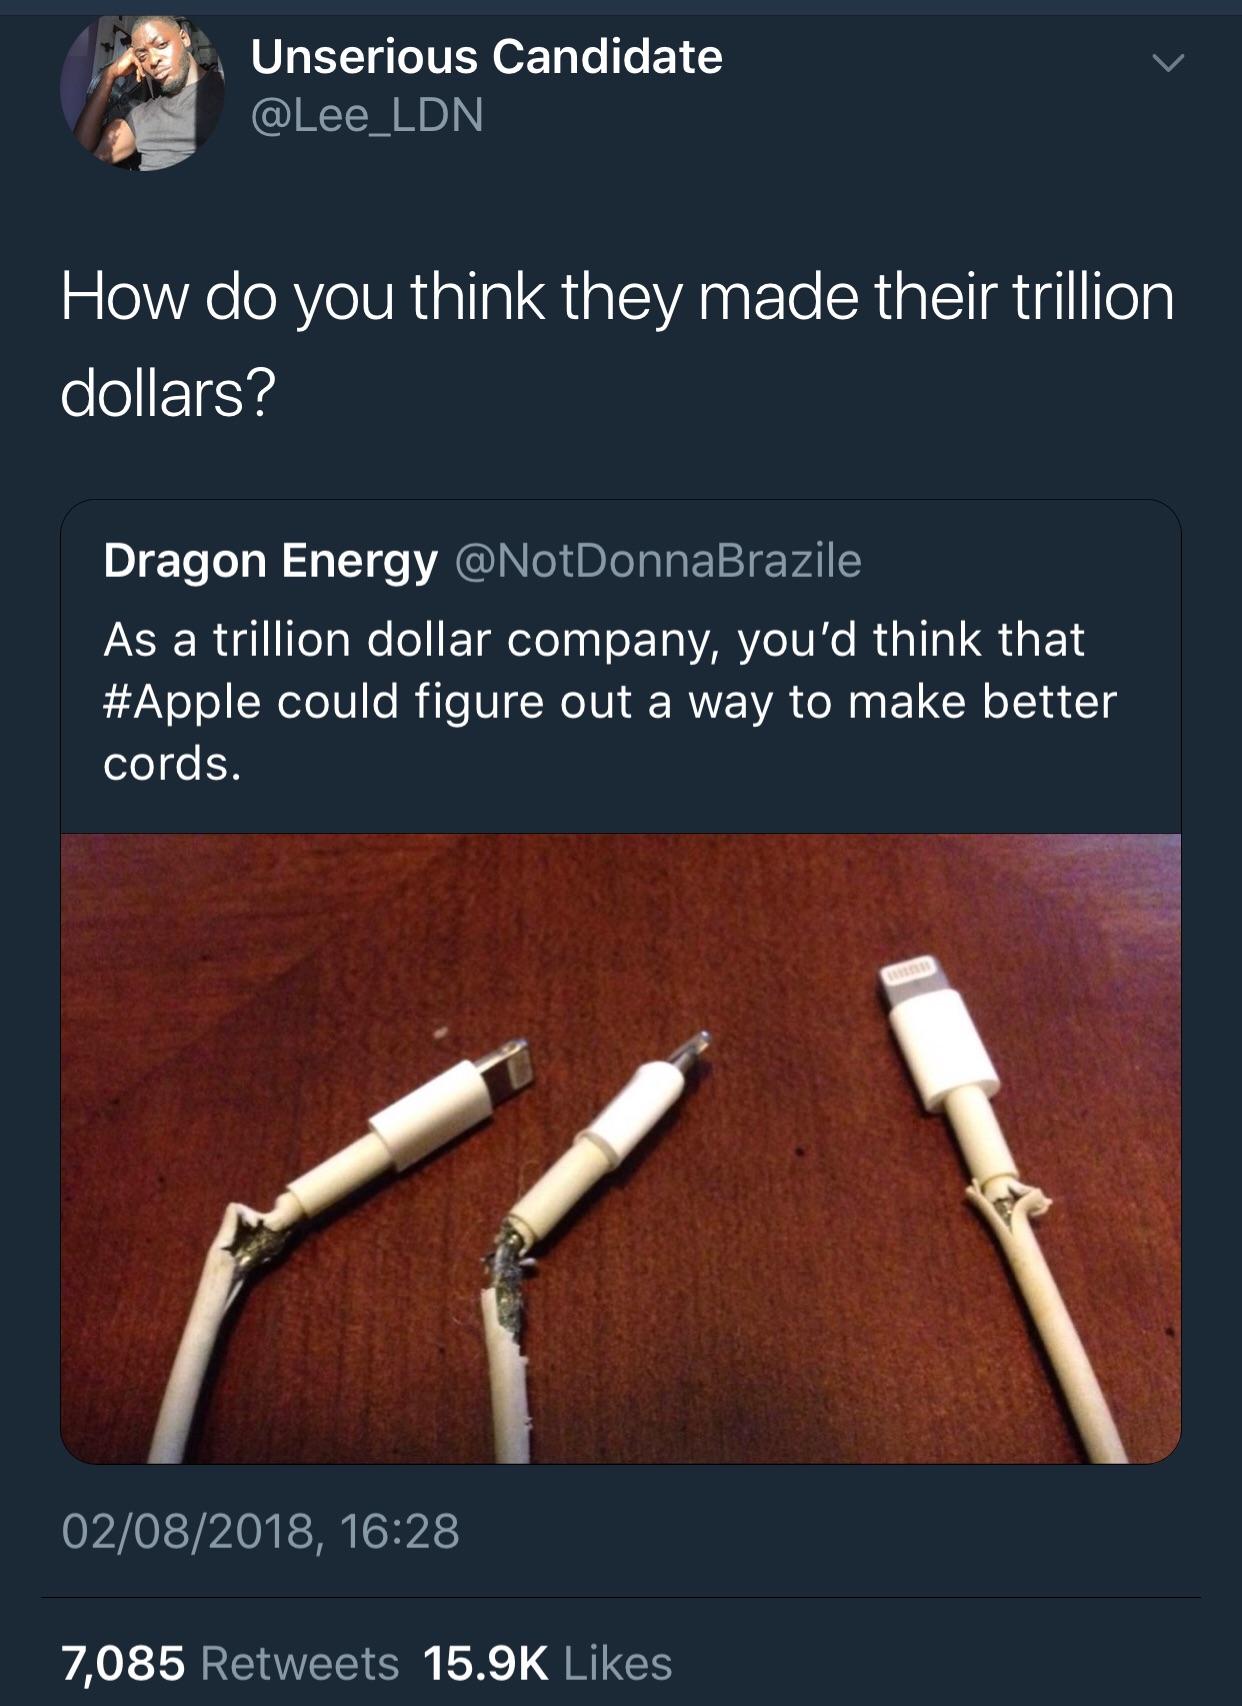 smoking cessation - Unserious Candidate How do you think they made their trillion dollars? Dragon Energy As a trillion dollar company, you'd think that could figure out a way to make better cords. 02082018, 7,085